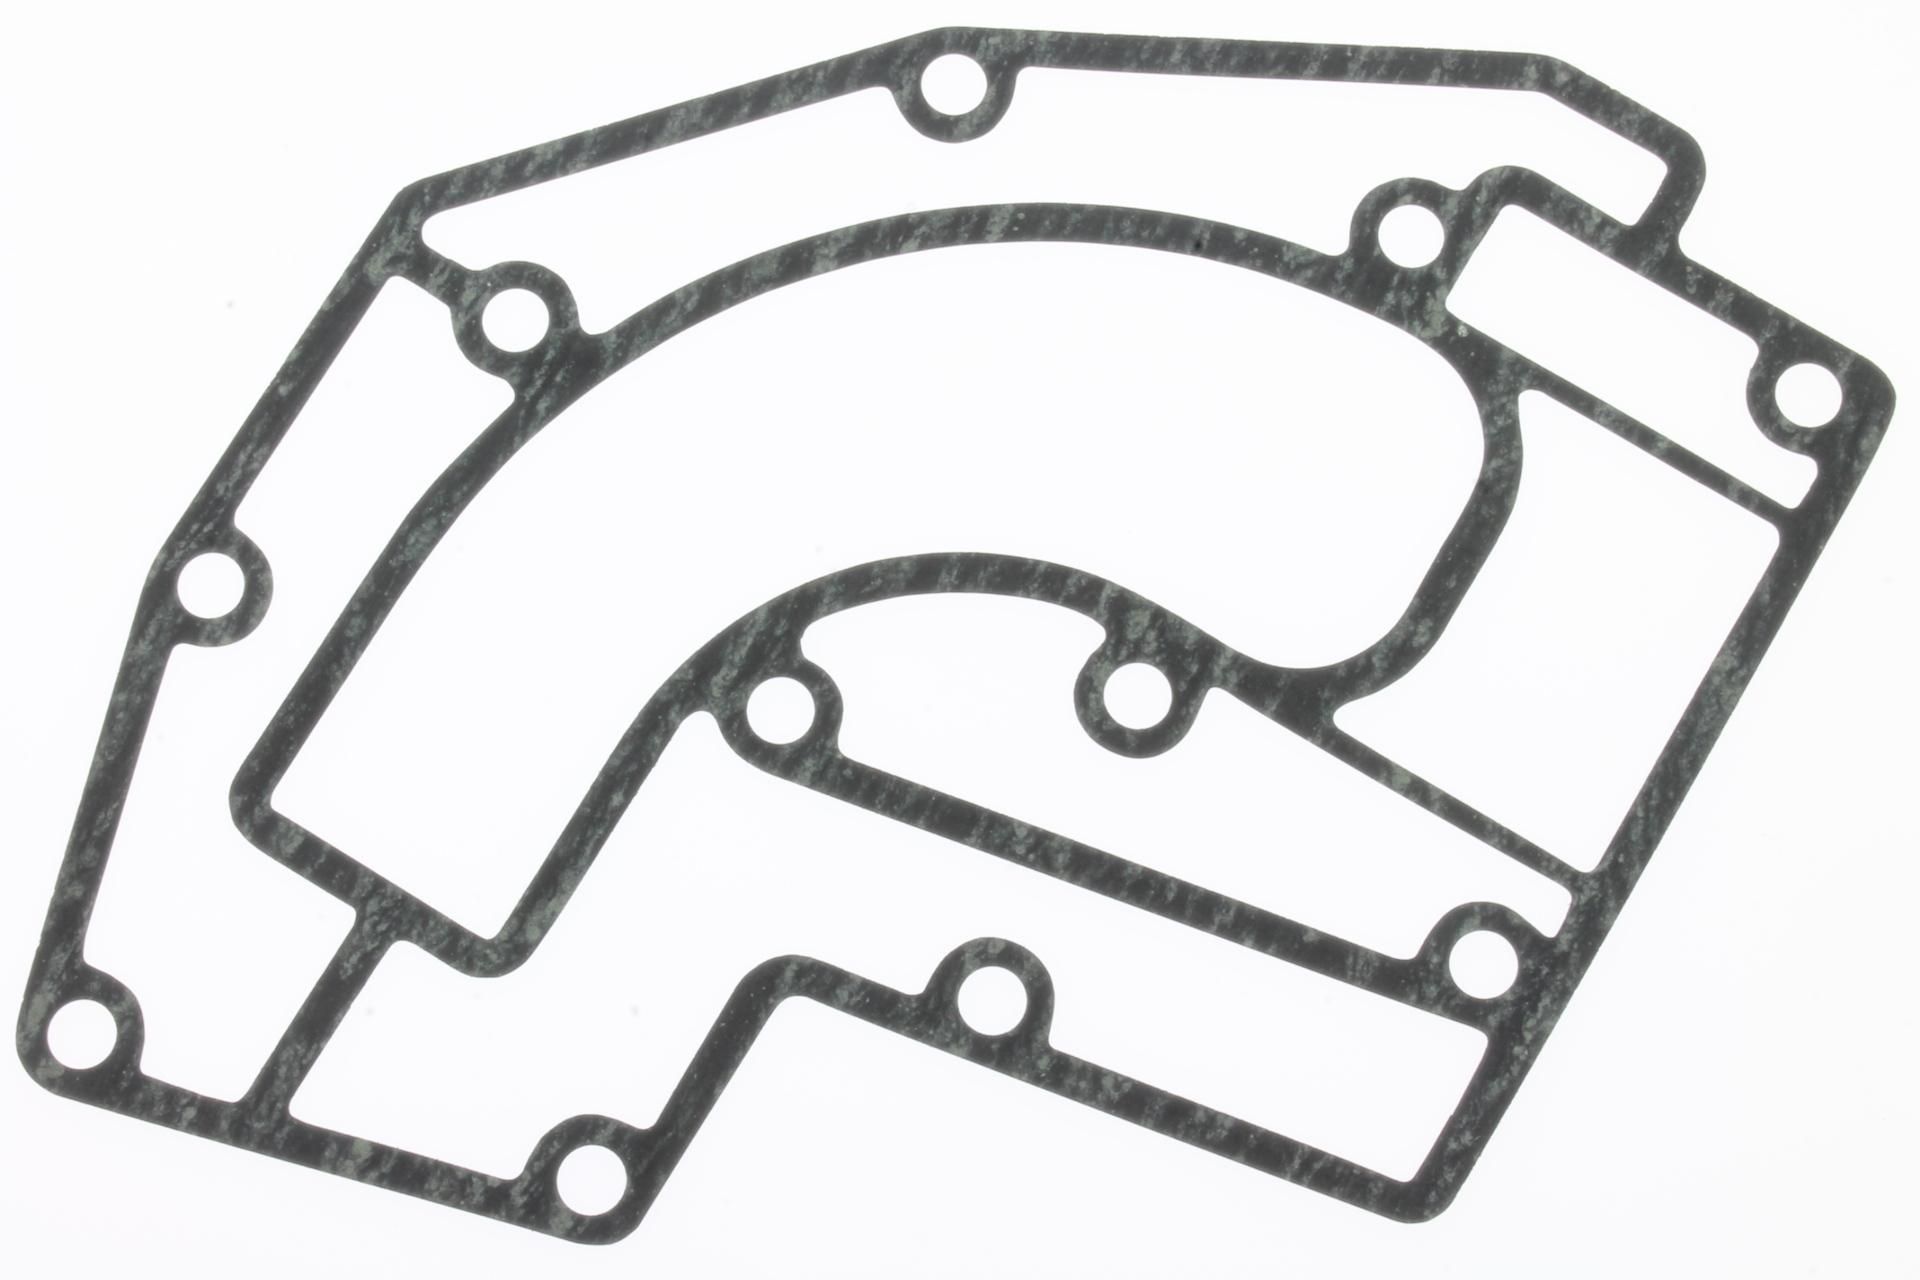 6K8-41114-A1-00 EXHAUST OUTER COVER GASKET